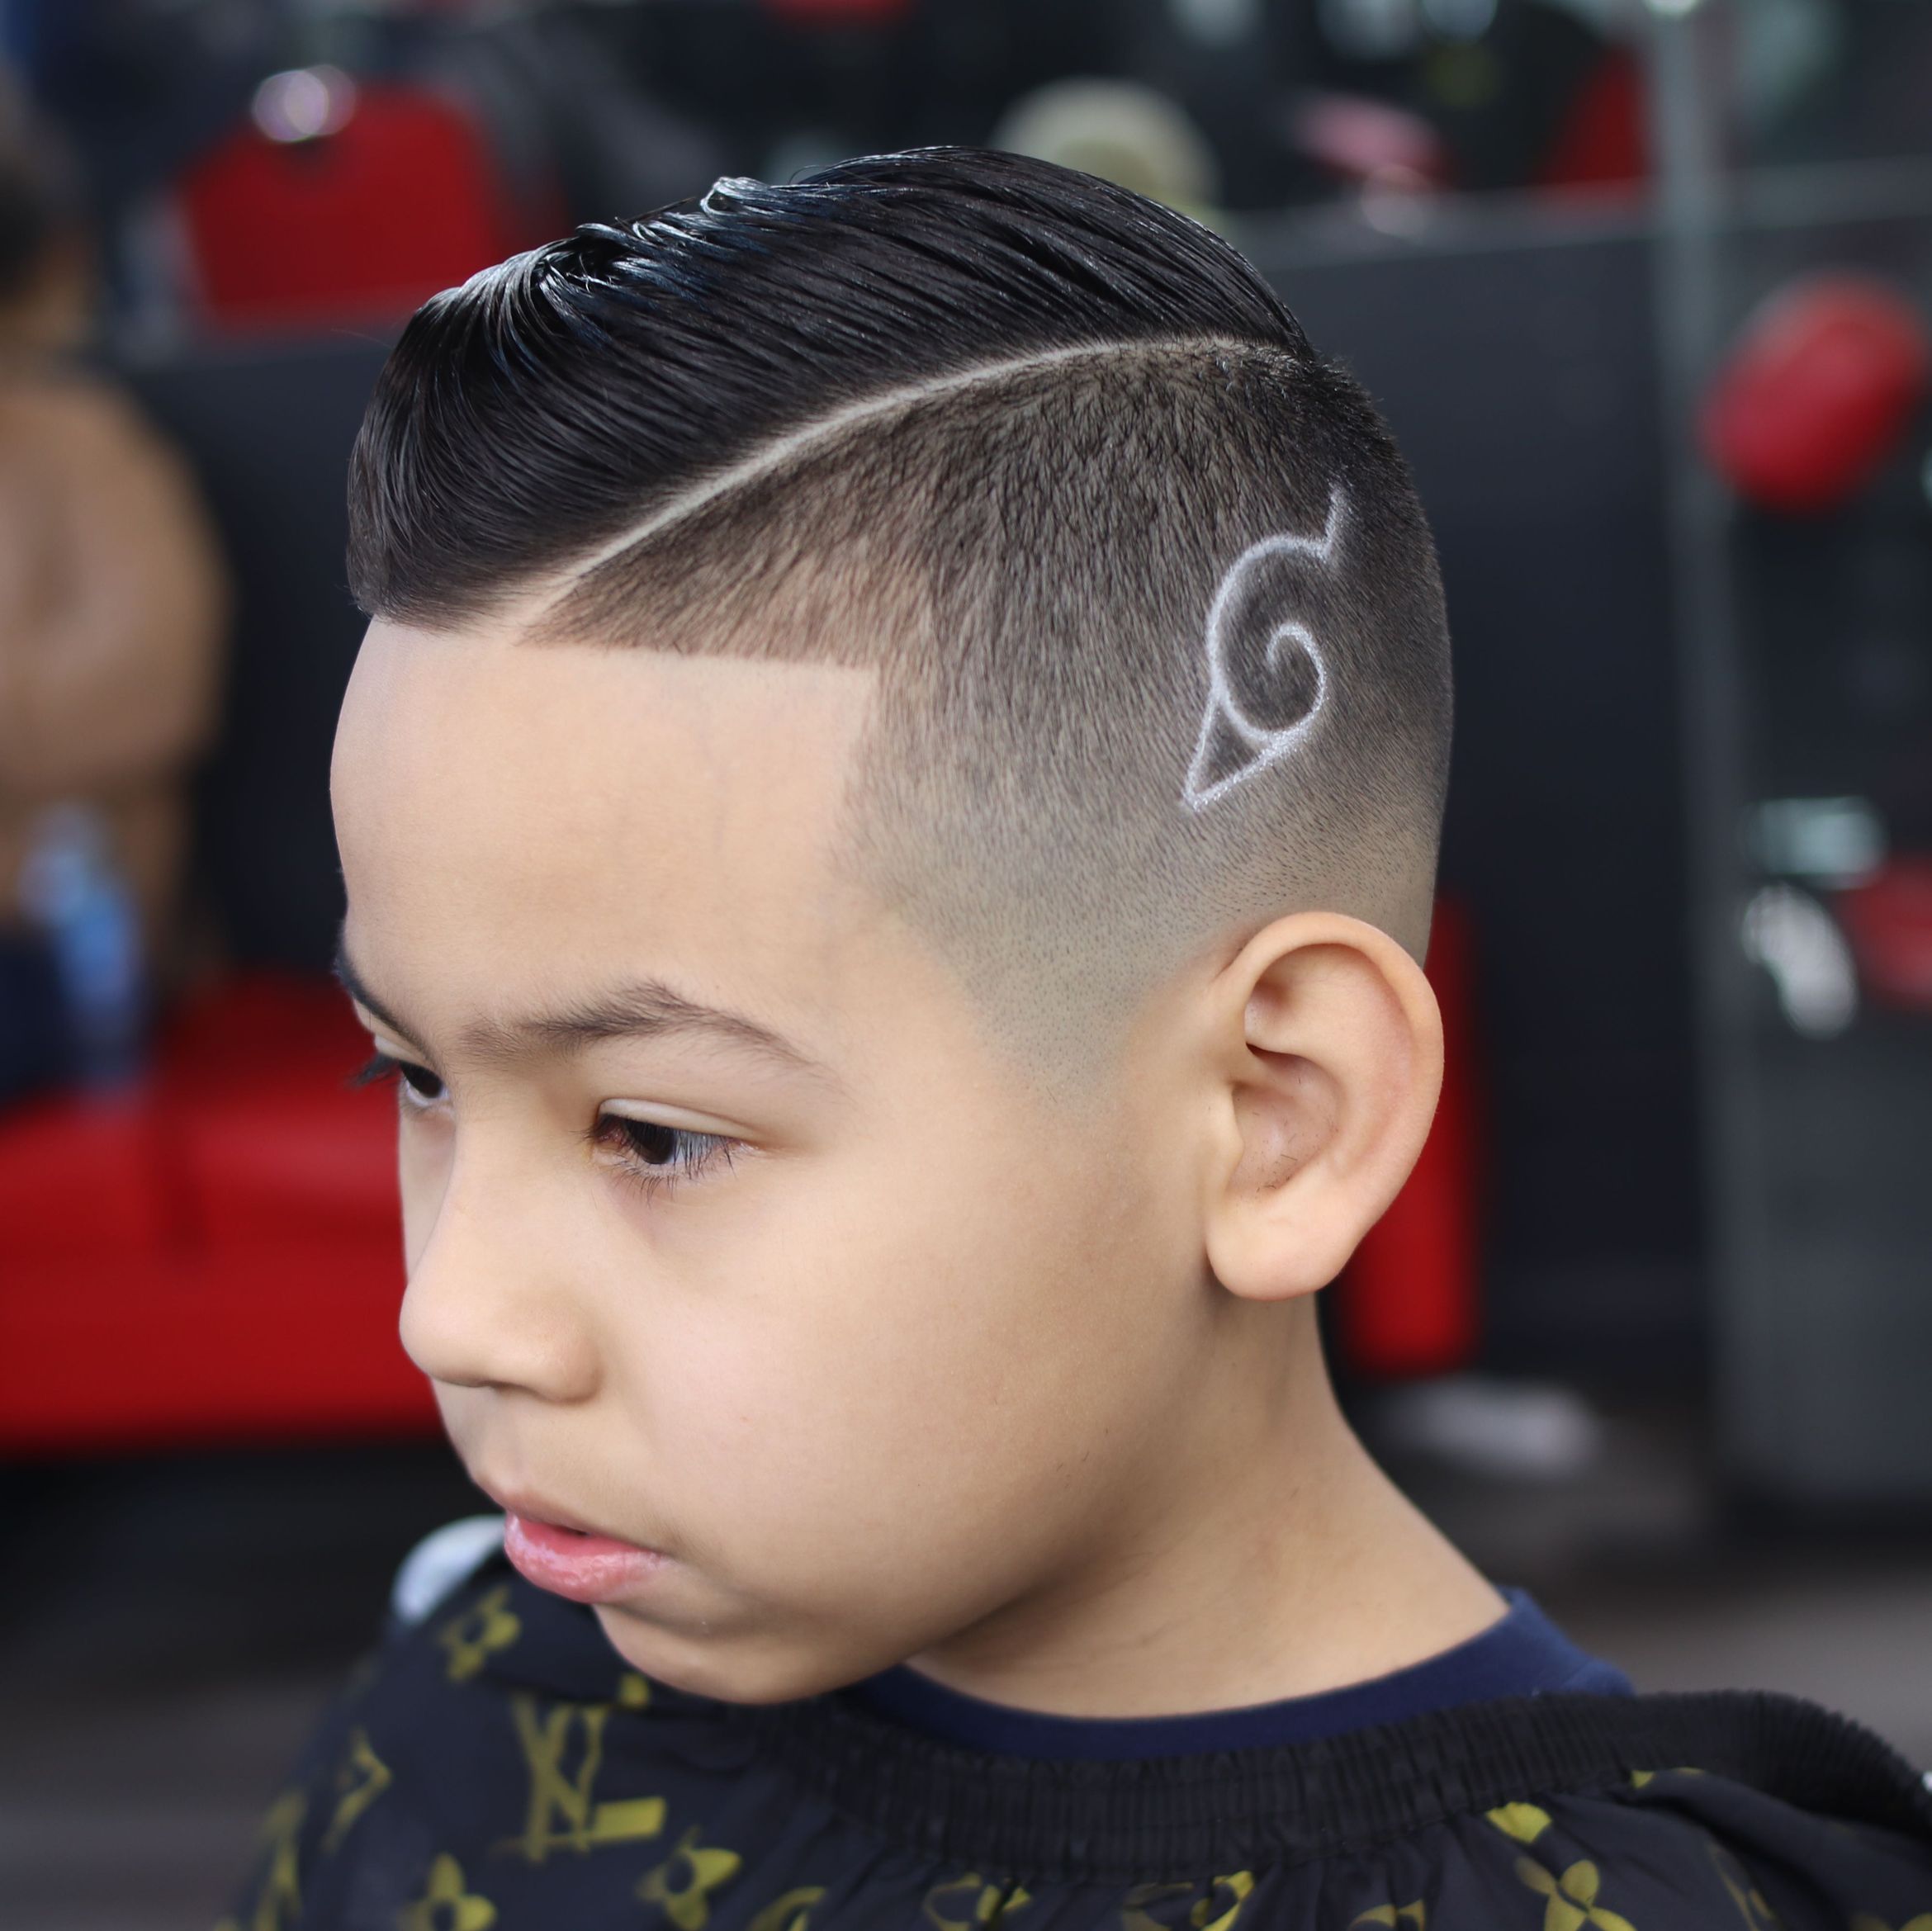 Kids Haircut (kids must be 12 and under) portfolio